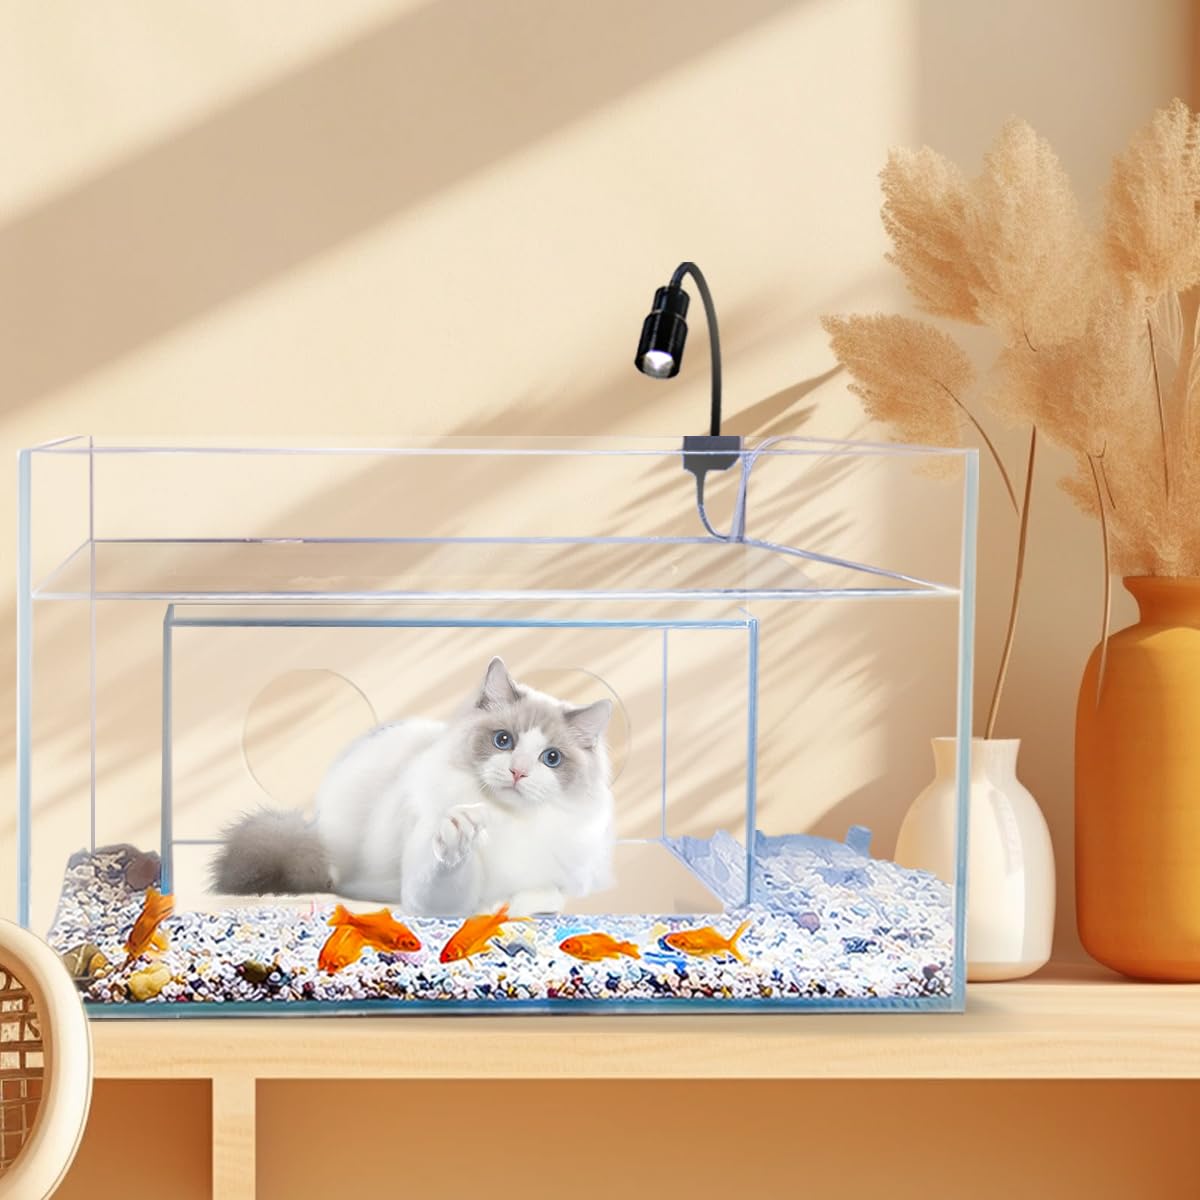 Cat House & Condos: Creative Funny Aquarium Tank for Cats to Watch and Play